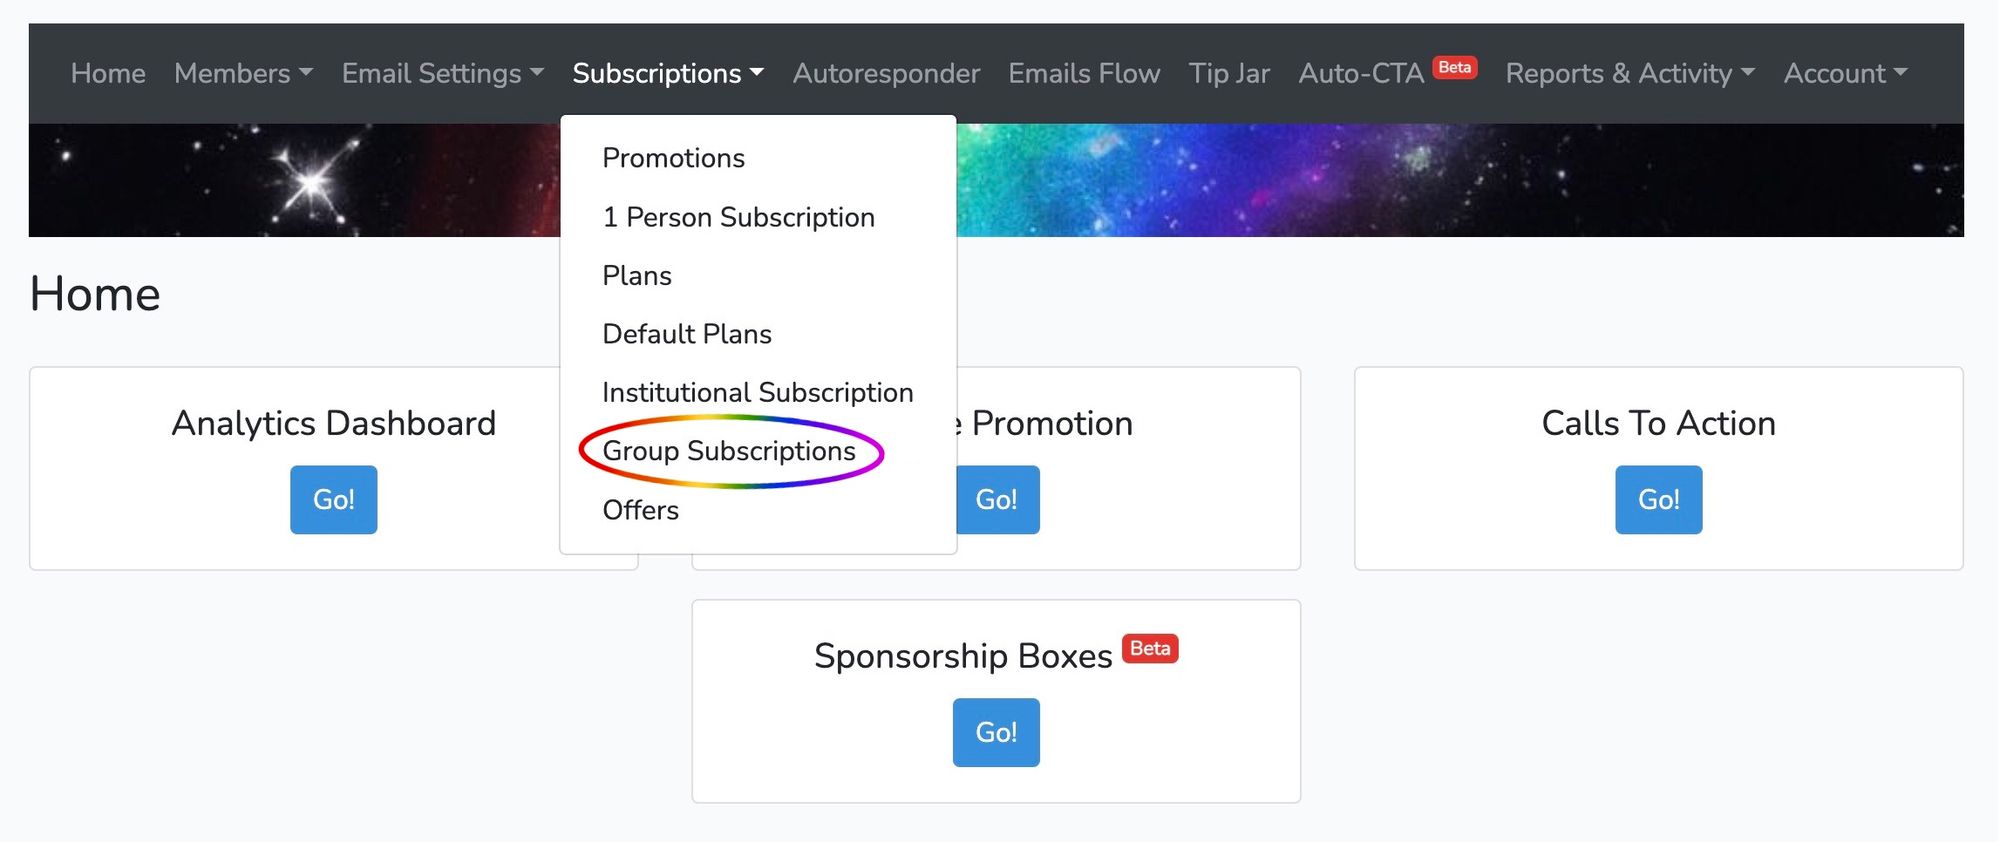 Group Subscriptions circled